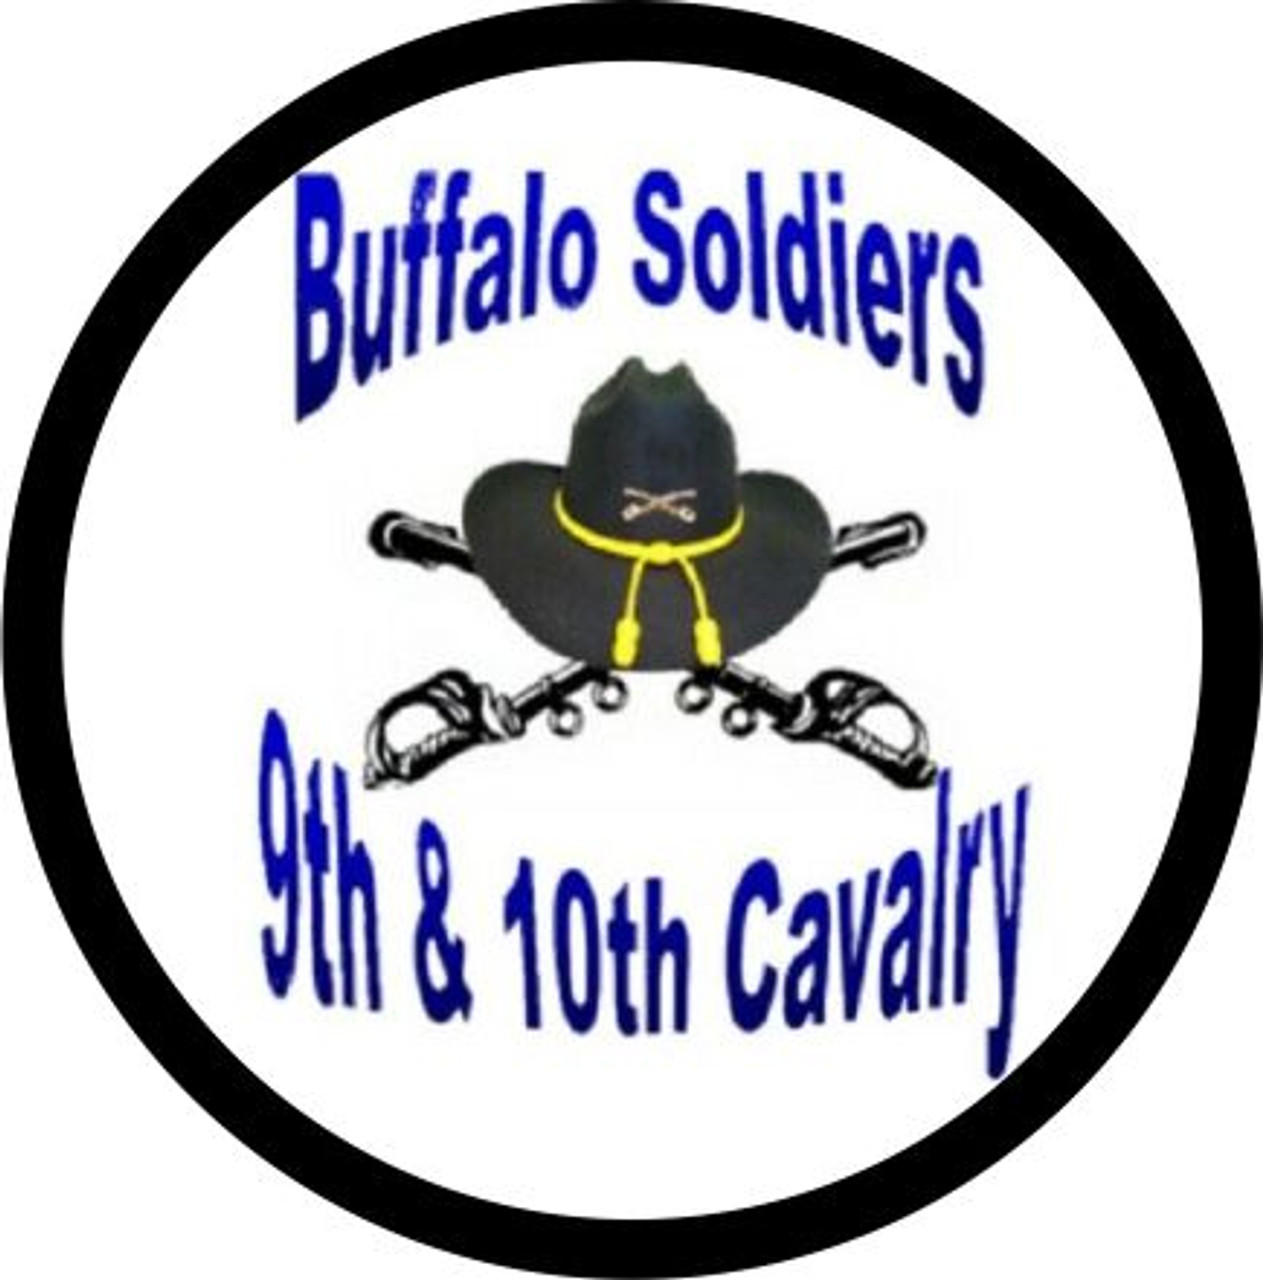 Buffalo Soldiers 9th 10th Cavalry Christmas Ornament